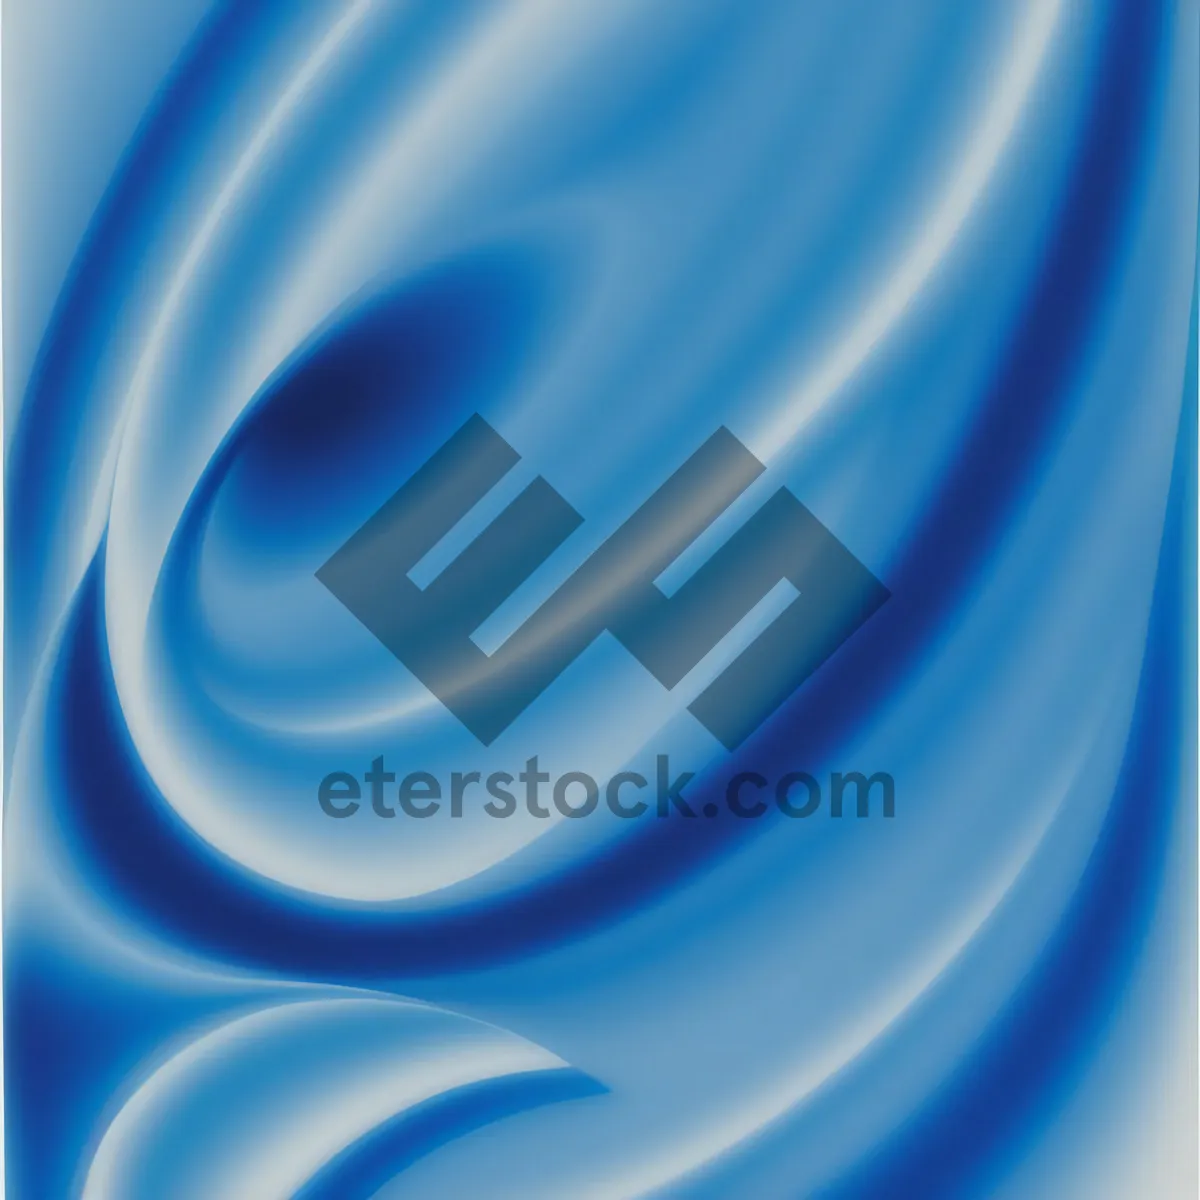 Picture of Electric Dreams: Abstract Blurred Lighting Wallpaper Design